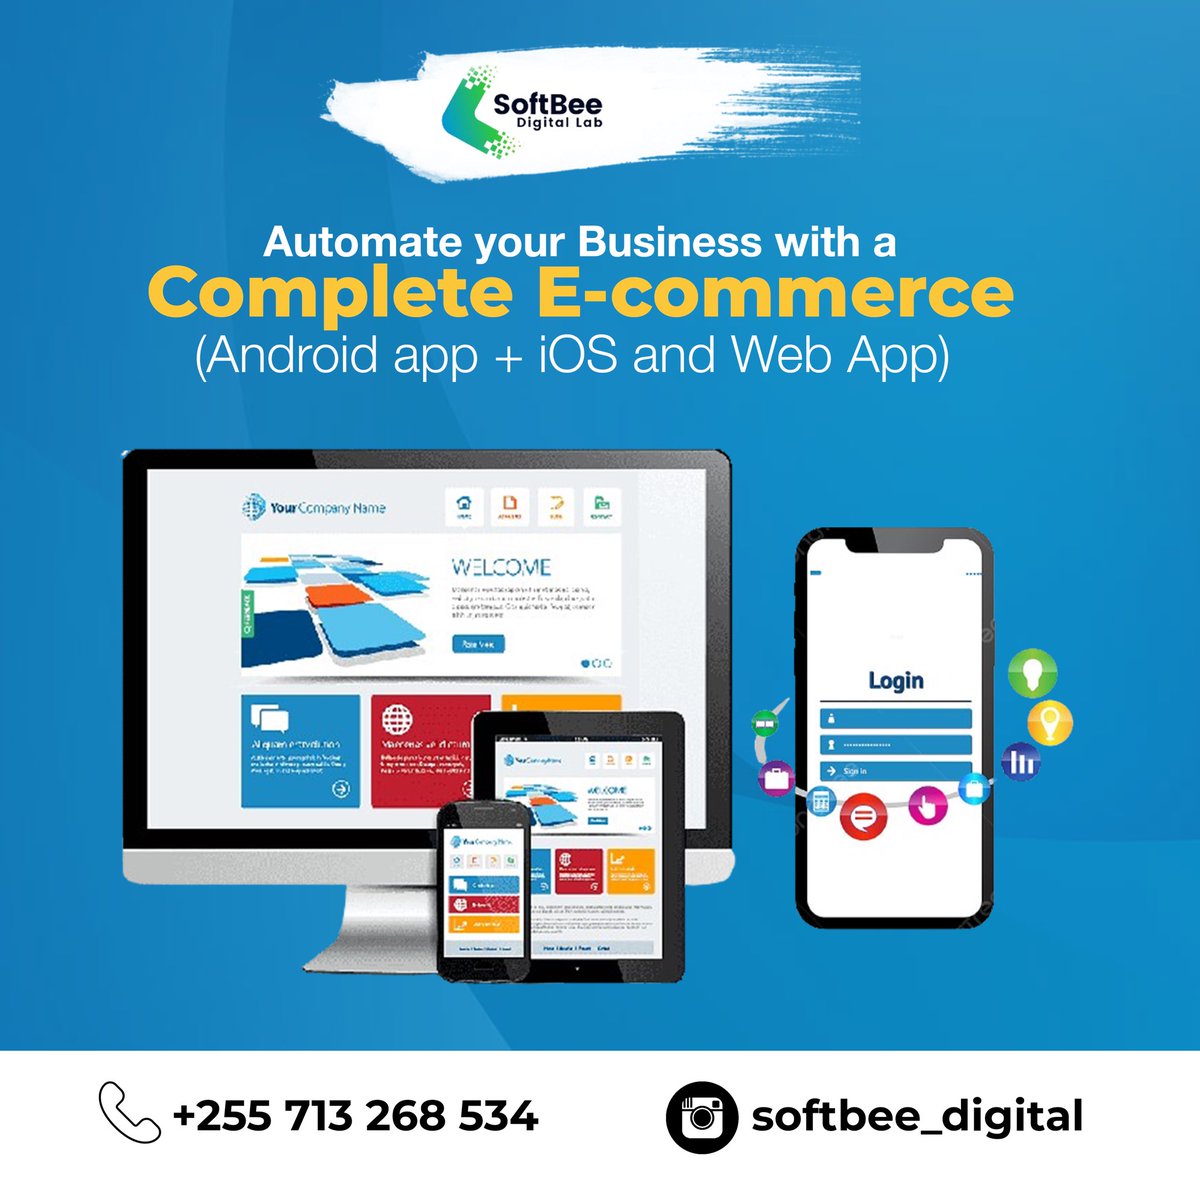 Automate your business with a Complete E-commerce solution (Web and Mobile App).

Book yours today ☎️ 0713268534/0766005441

#softbeedigital #mobileapps #webapps